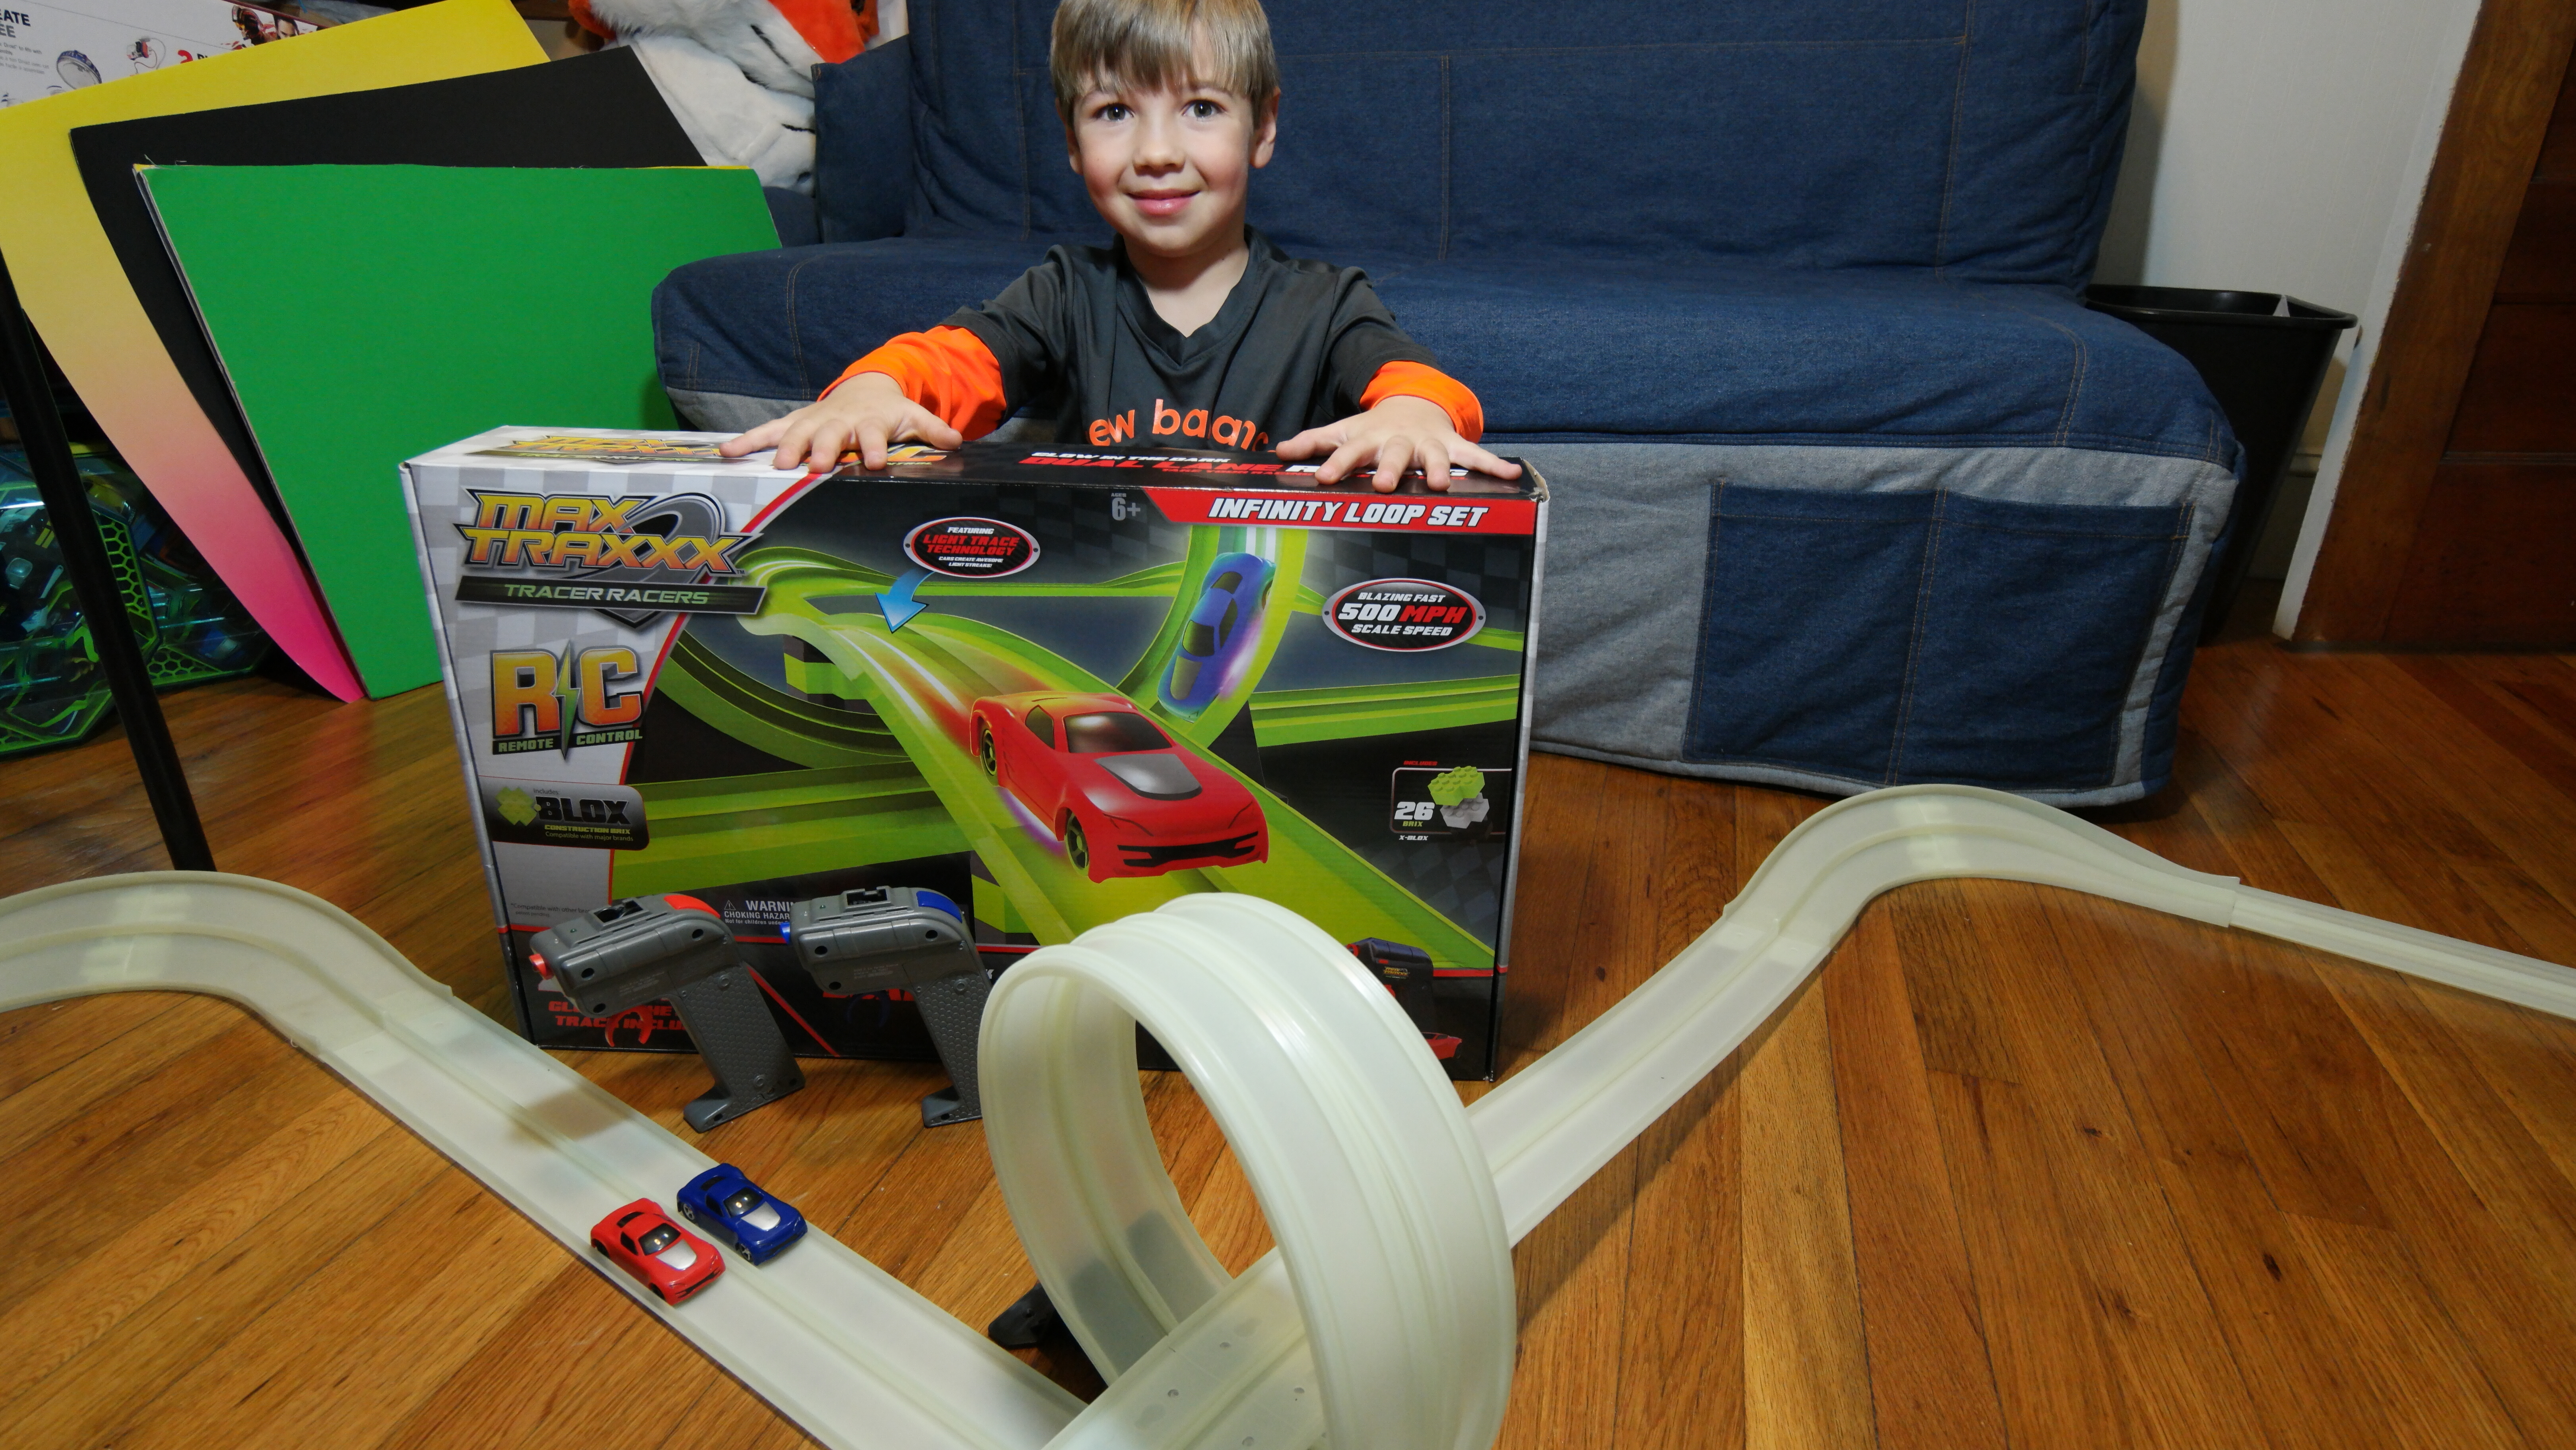 Review: MAX TRAXXX Tracer Racers Infinity Loop Set Is Crazy Fun